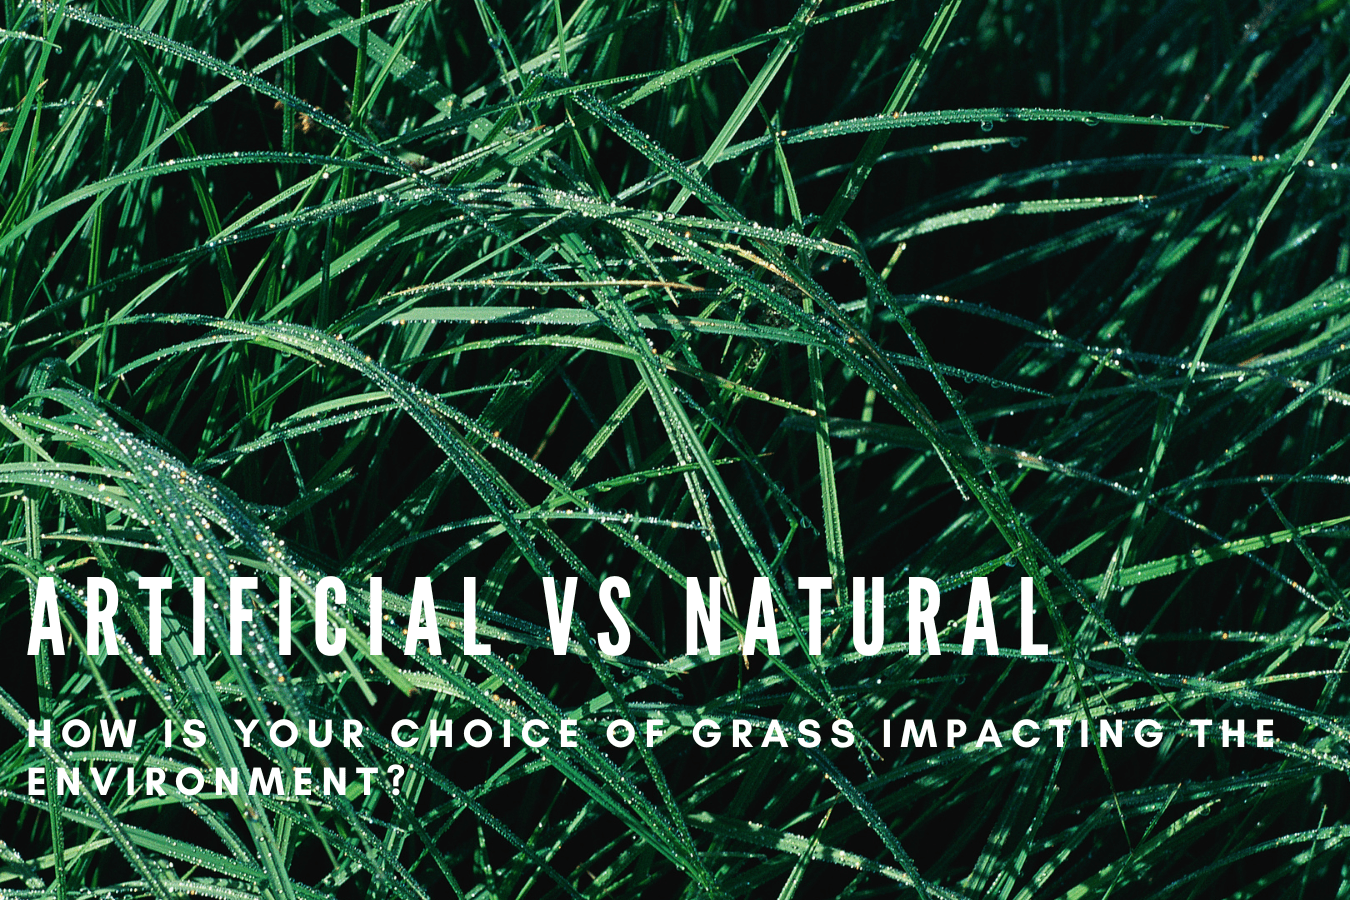 Artificial Vs Natural. How is your choice of grass impacting the environment?